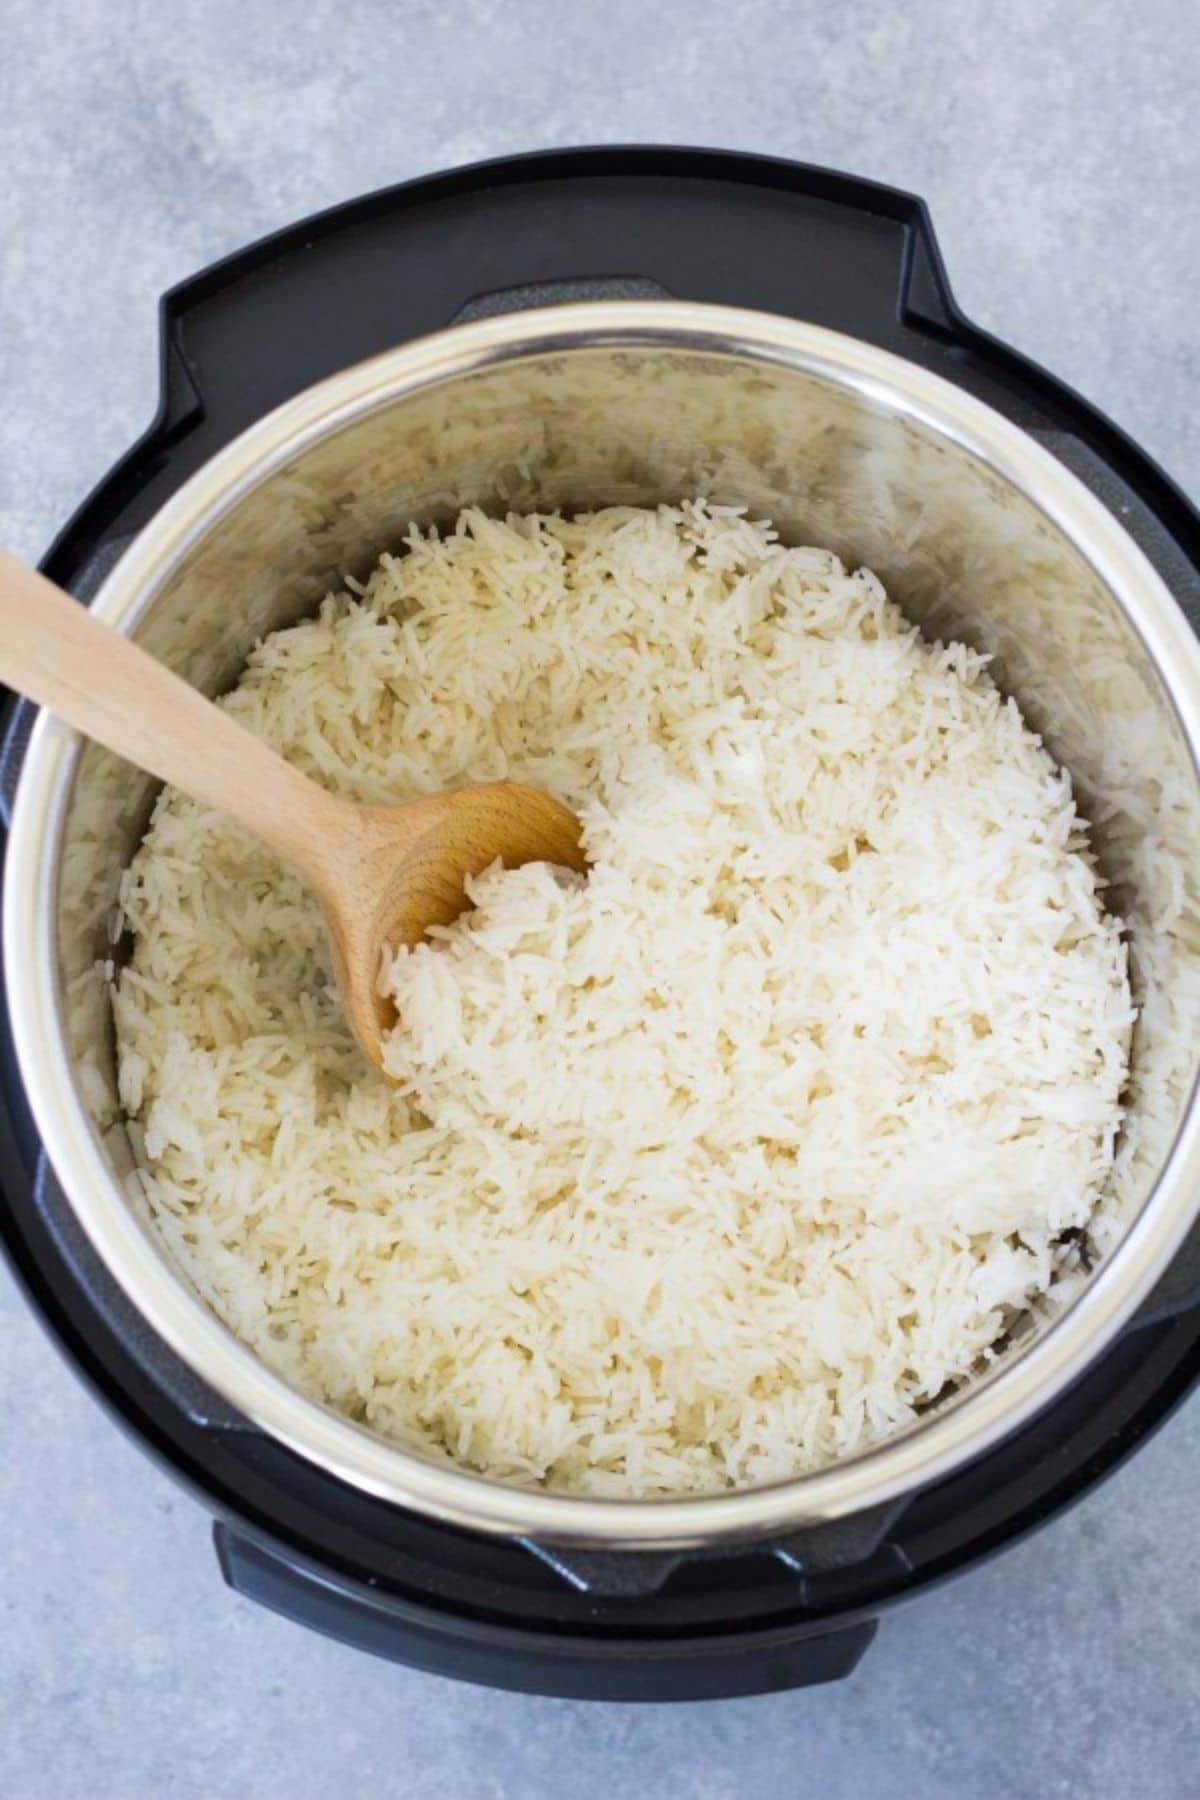 Instant pot of rice with wooden spoon